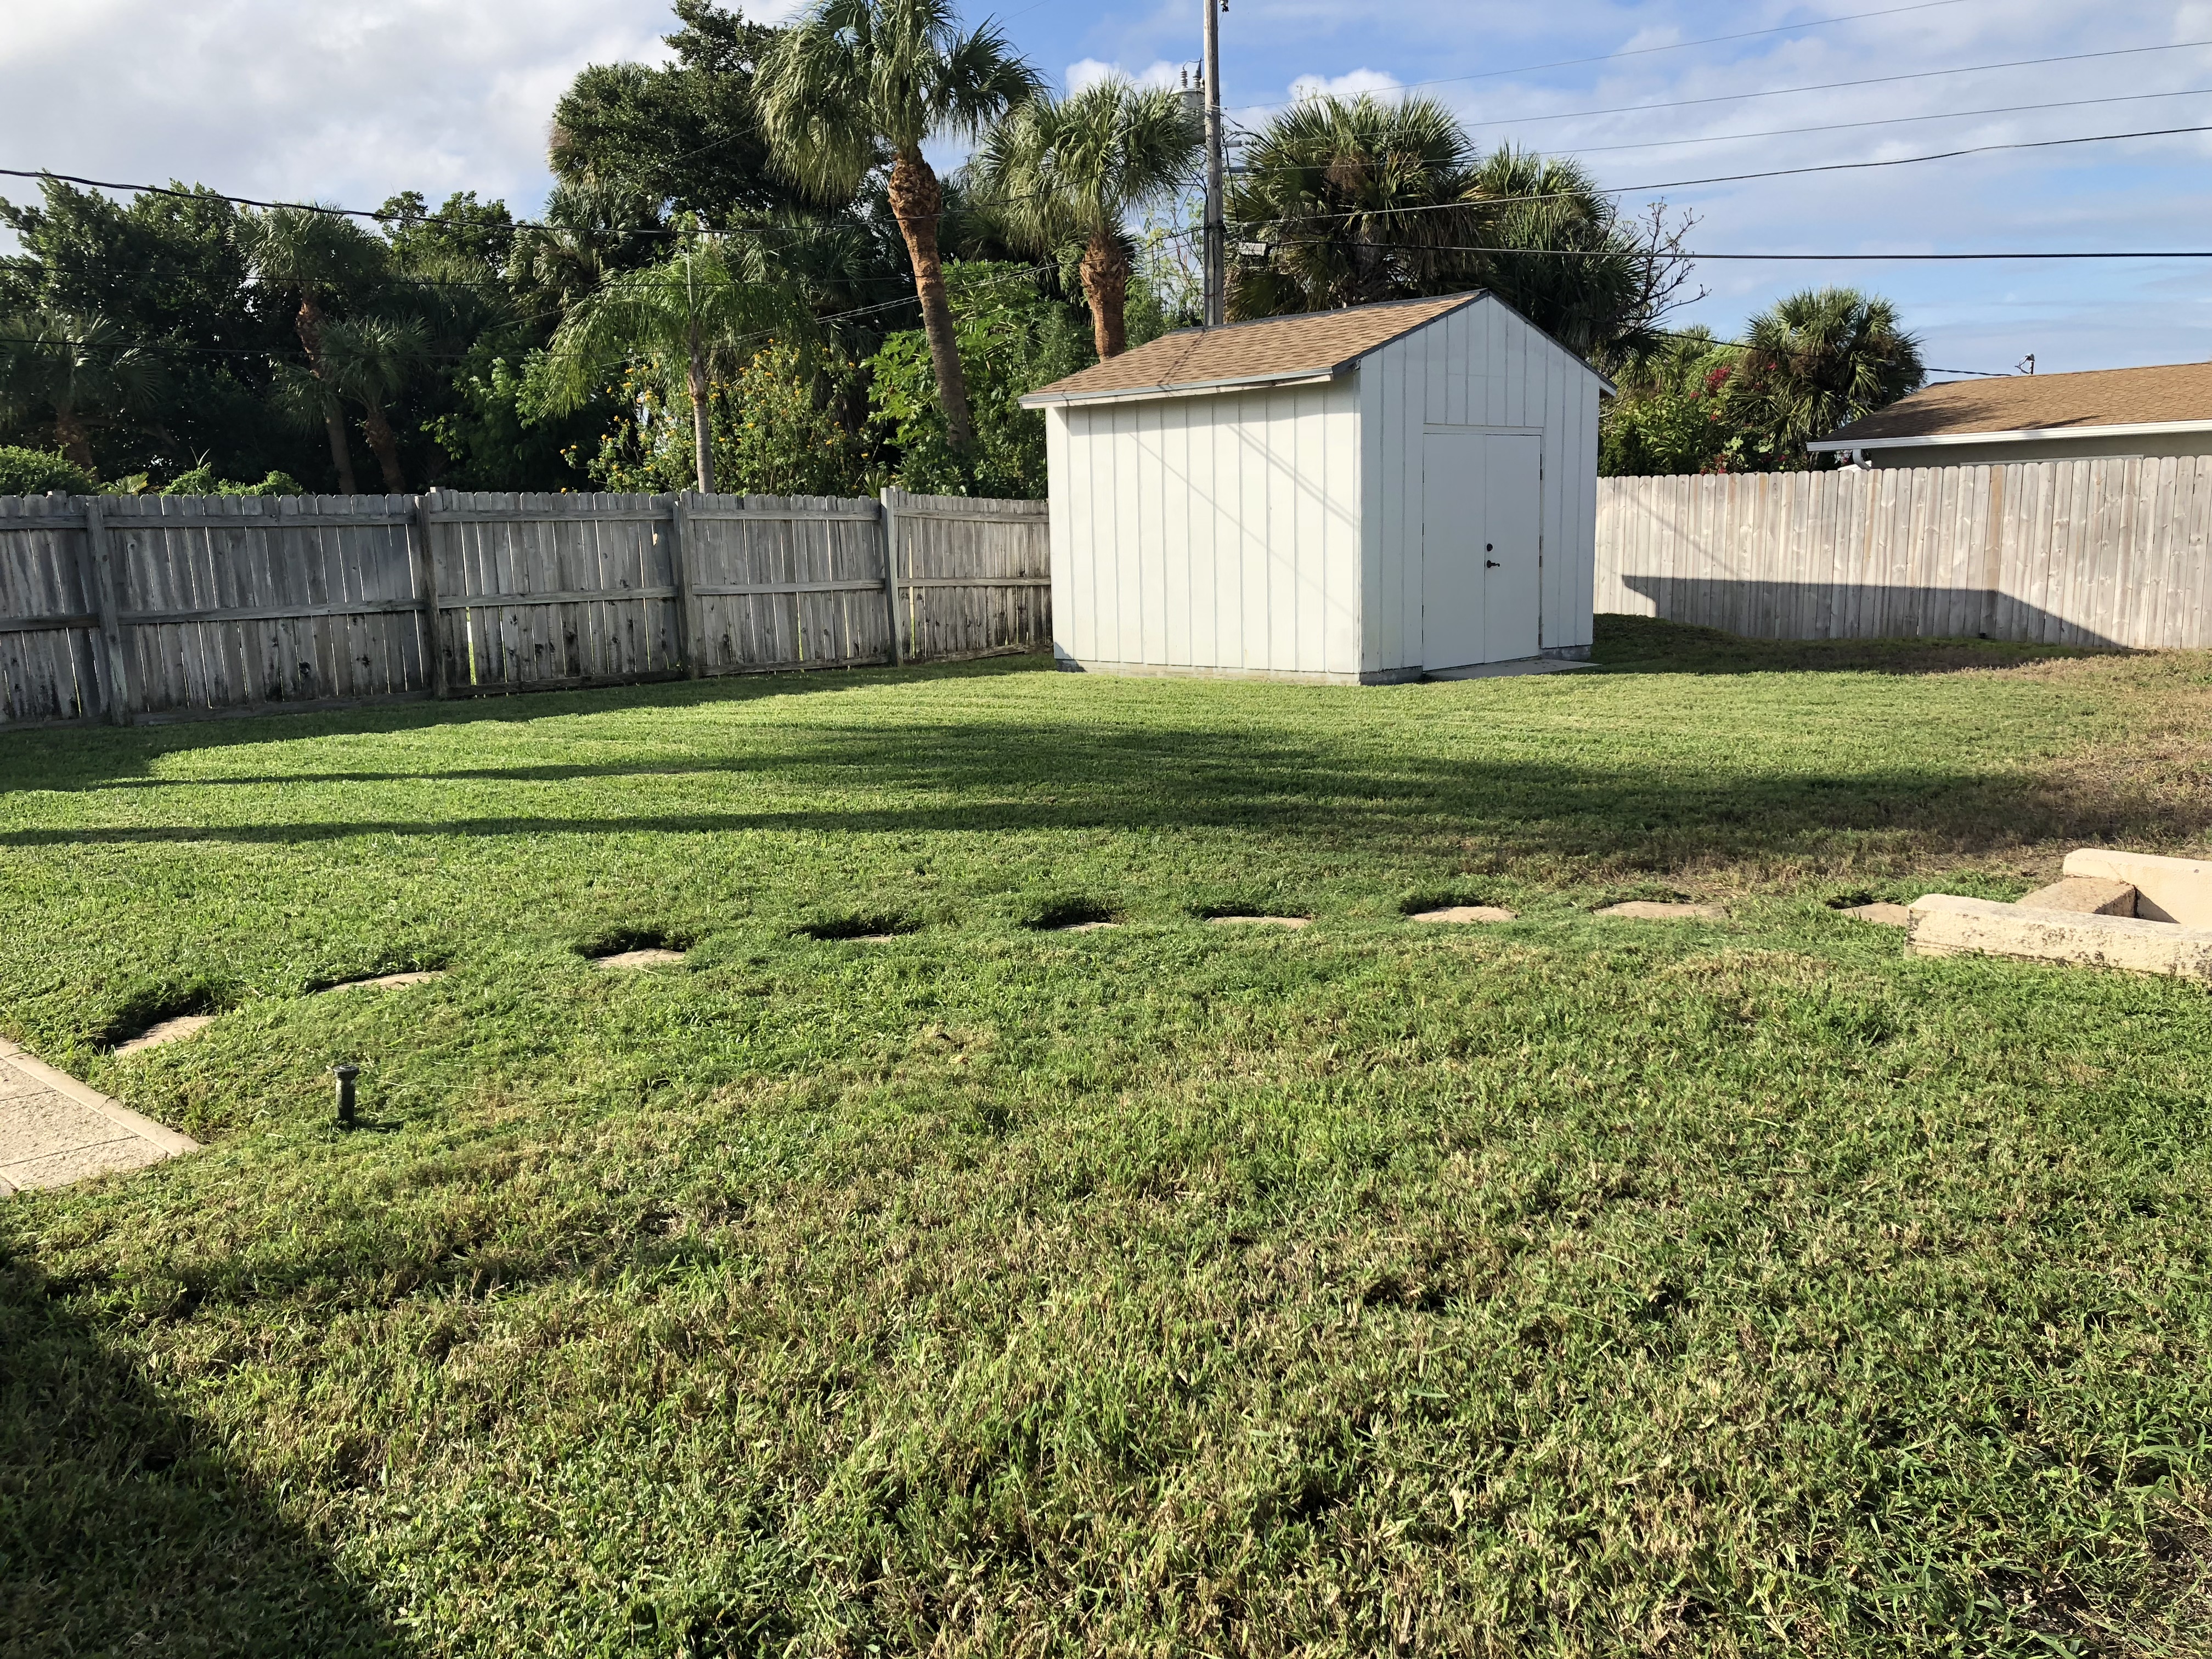 Beachside Lawn Care - Indian Harbour Beach Lawn Service